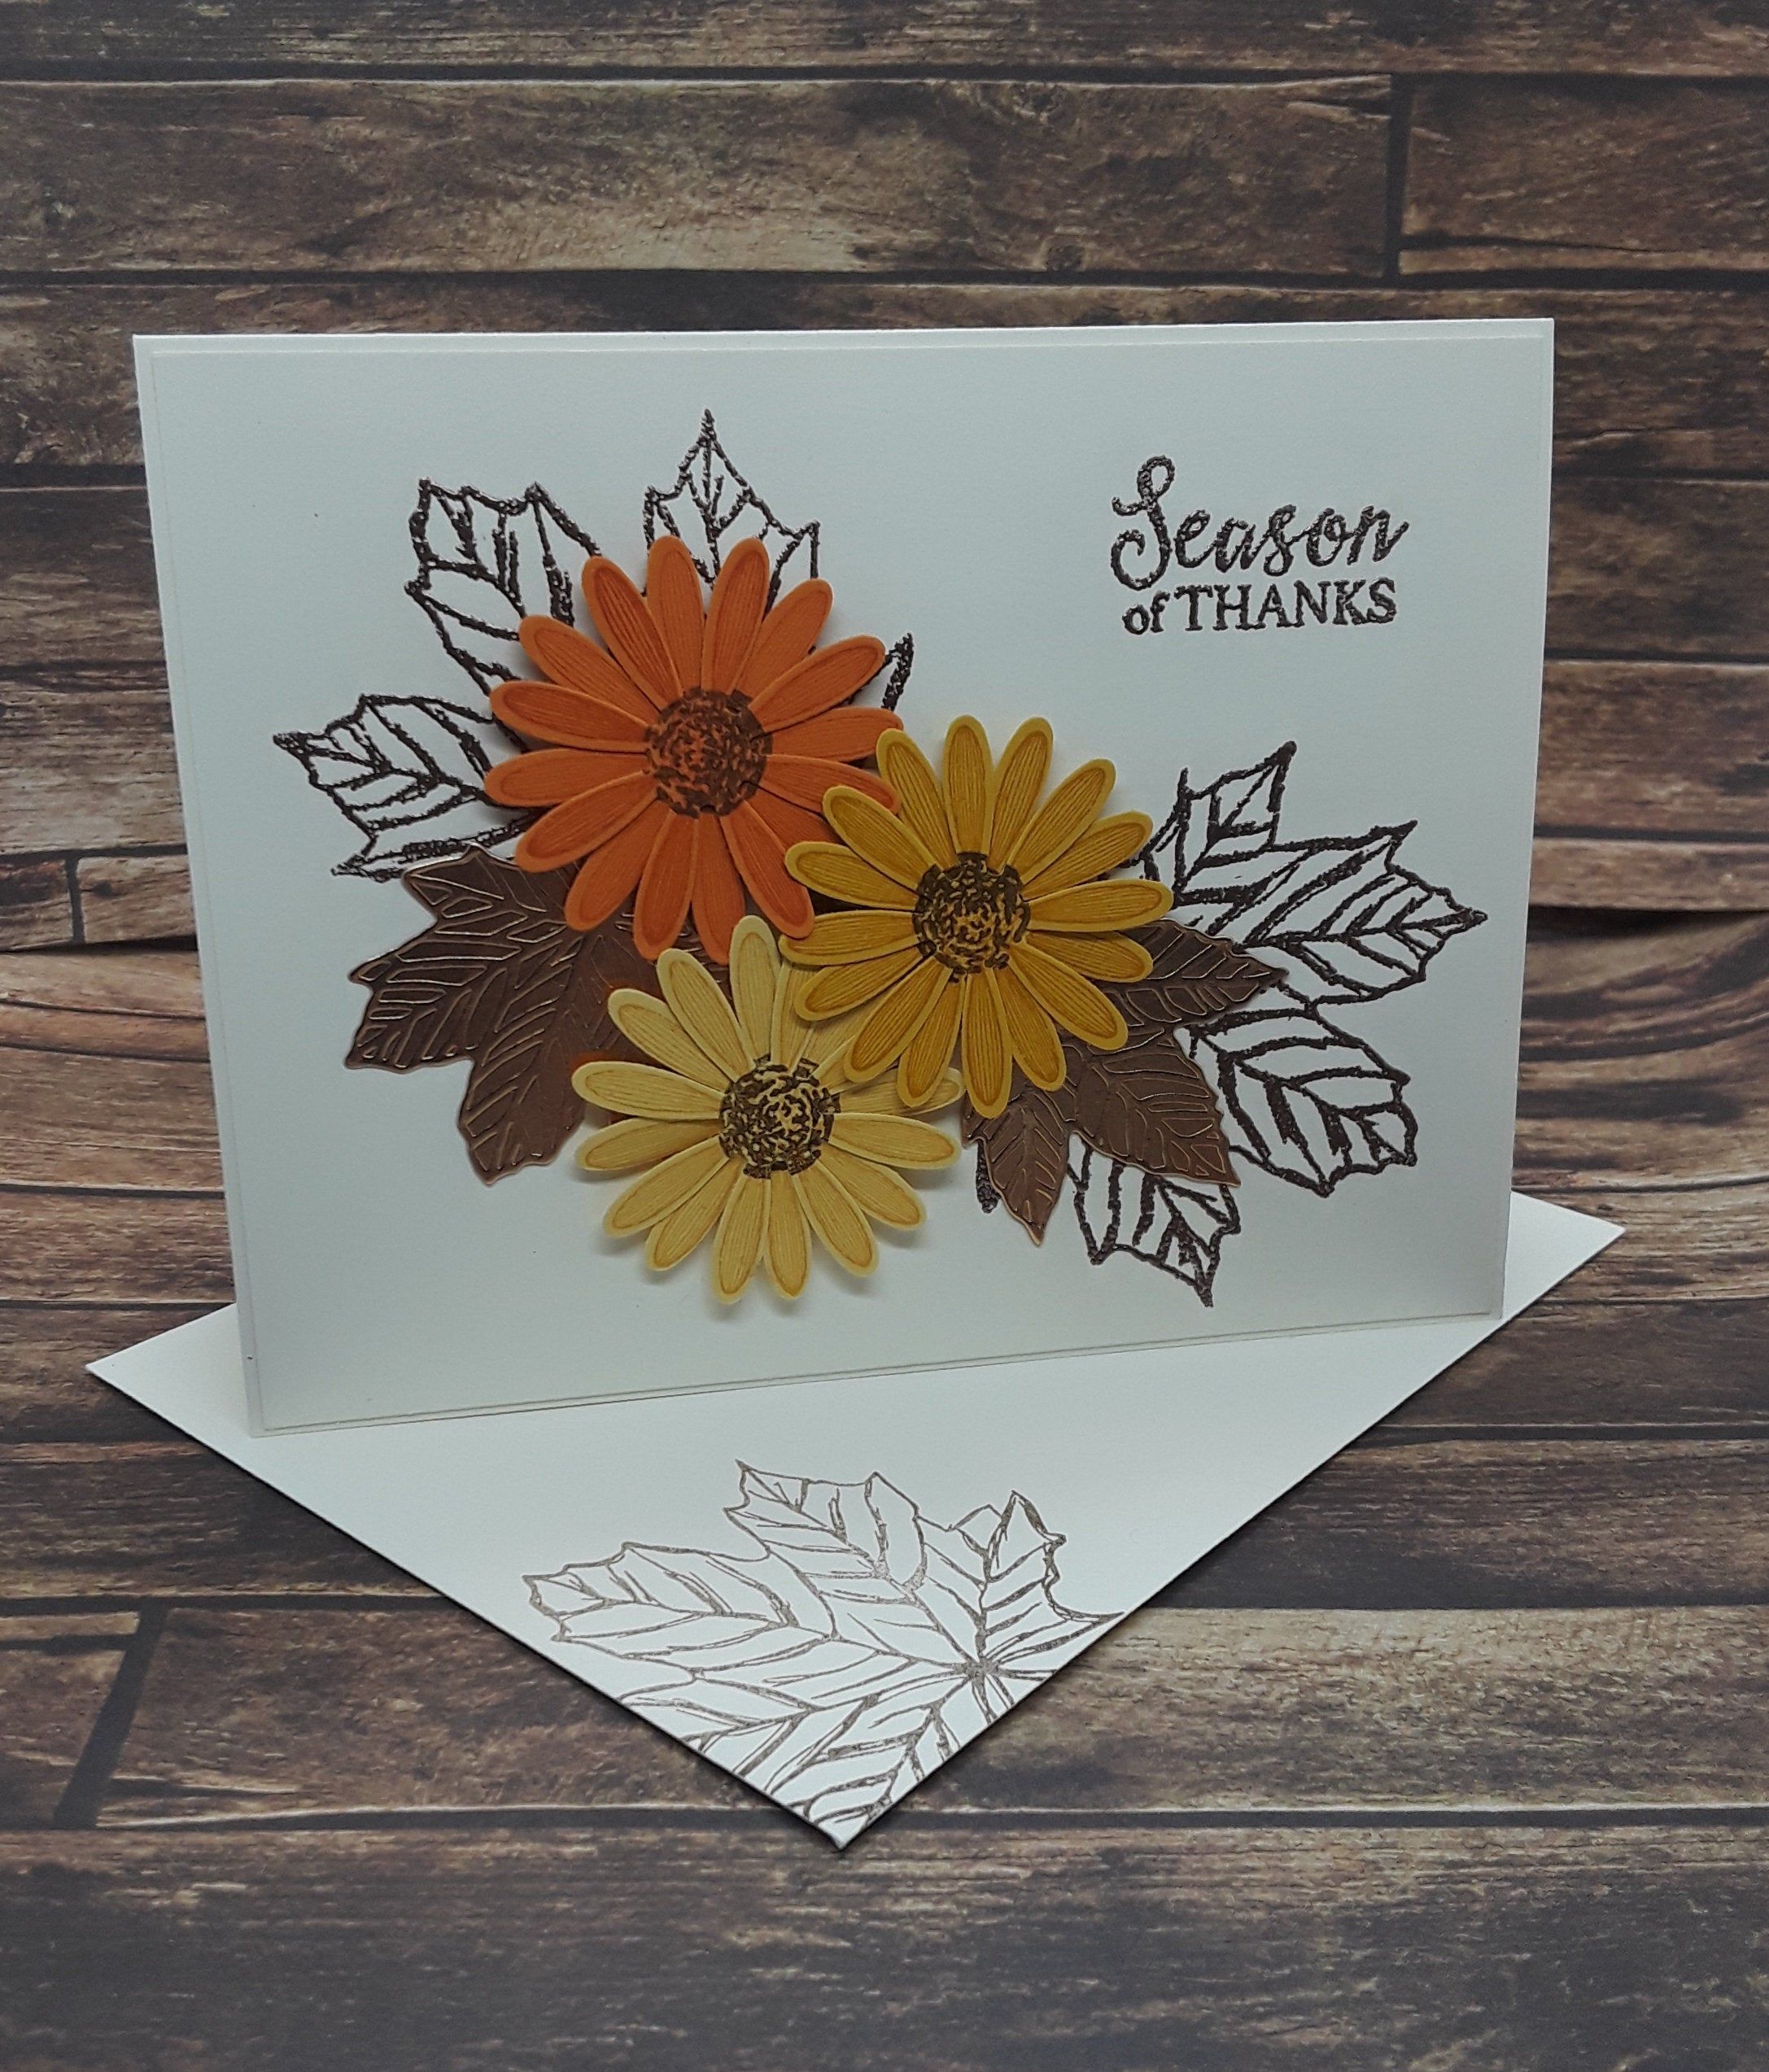 Season of Thanks Stampin' Up! Fall Thanksgiving Day Holiday Greeting Card Handmade Handstamped - Season of Thanks Stampin' Up! Fall Thanksgiving Day Holiday Greeting Card Handmade Handstamped -   diy thanksgiving cards handmade